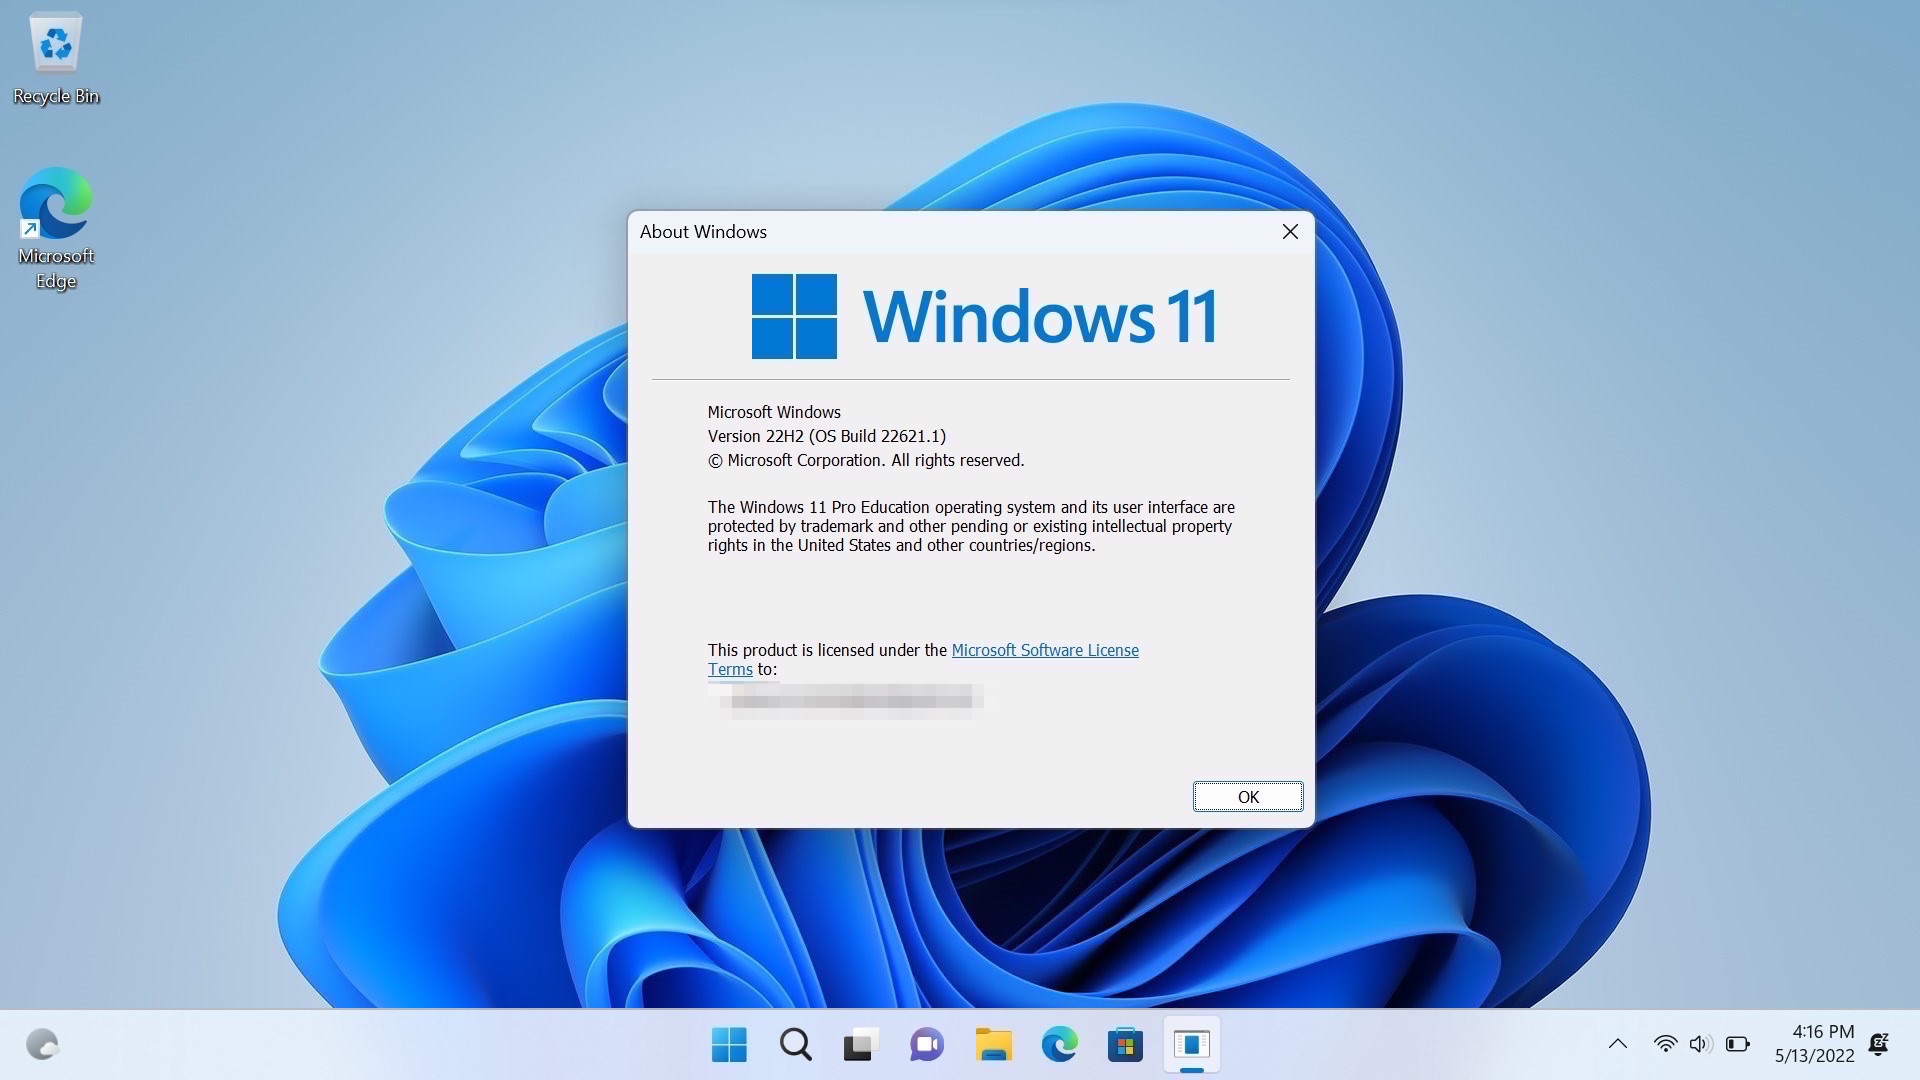 Windows 11 Update Rolls Out, Major Bluetooth Fixes and More Insider Detail Revealed